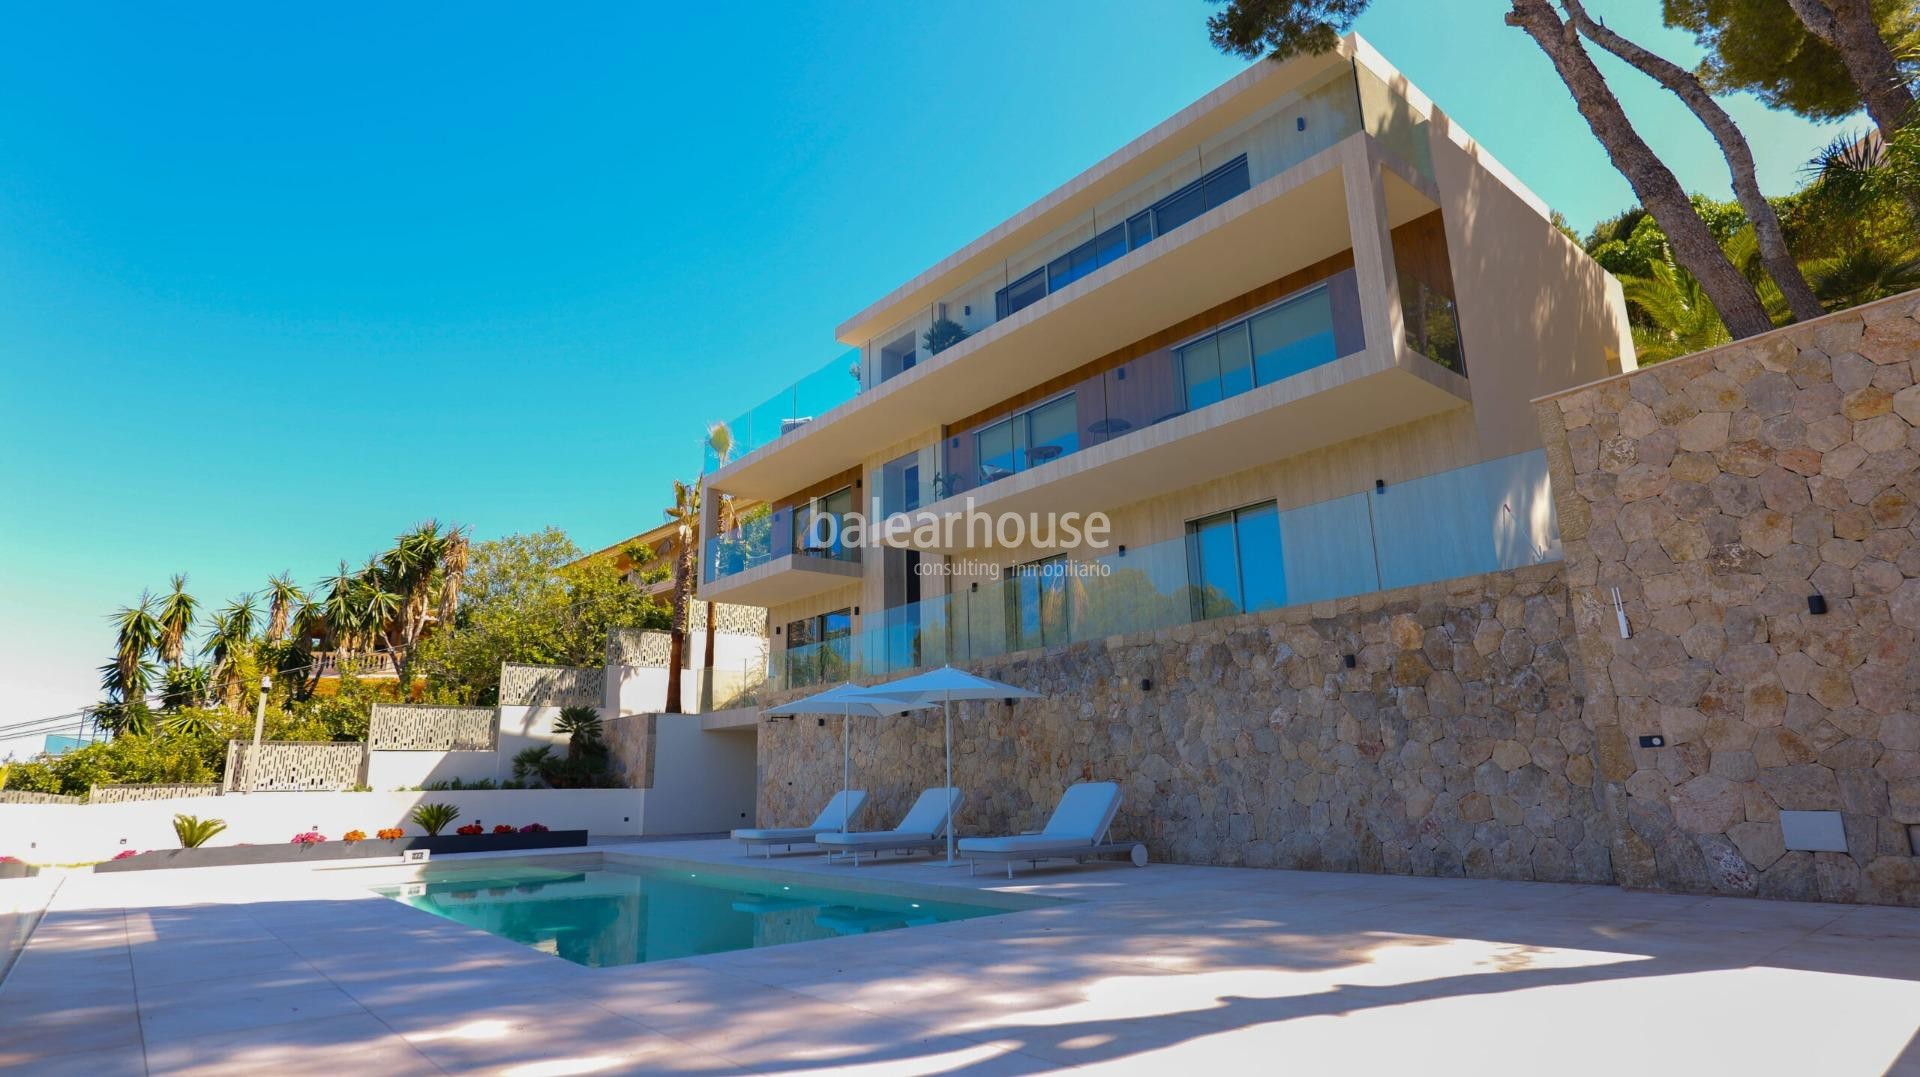 Excellent Moderna design with amazing sea views in this great new villa in Santa Ponsa